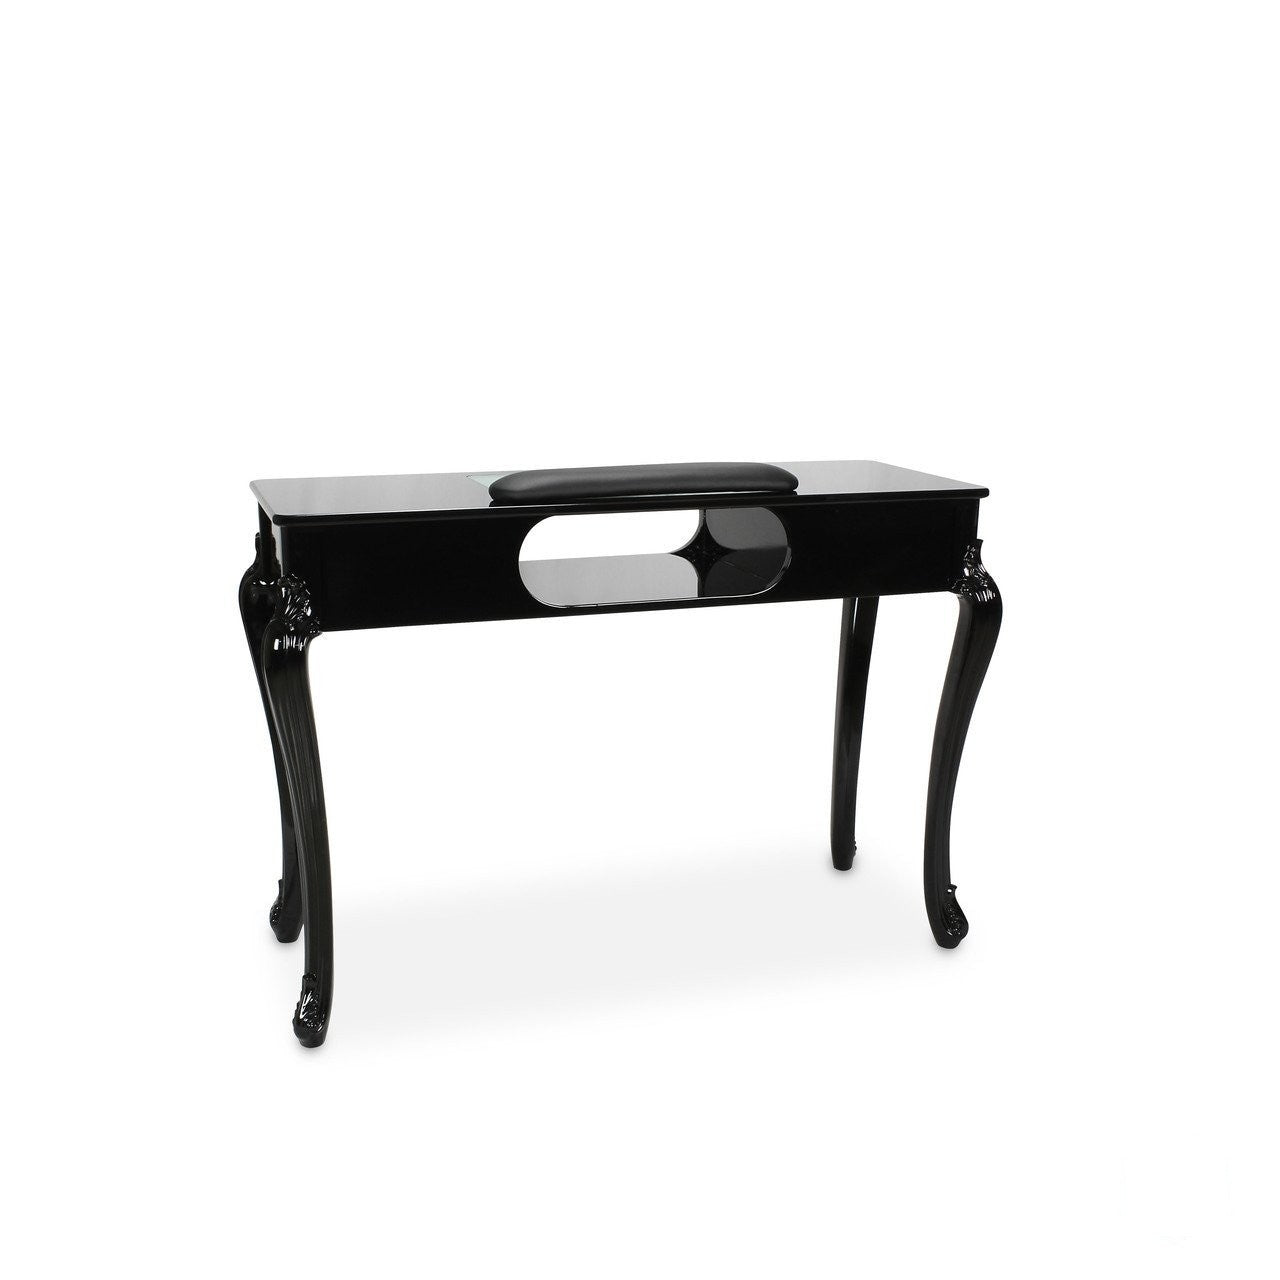 Berkeley Berkeley Fiona Manicure Table Manicure Nail Table - ChairsThatGive